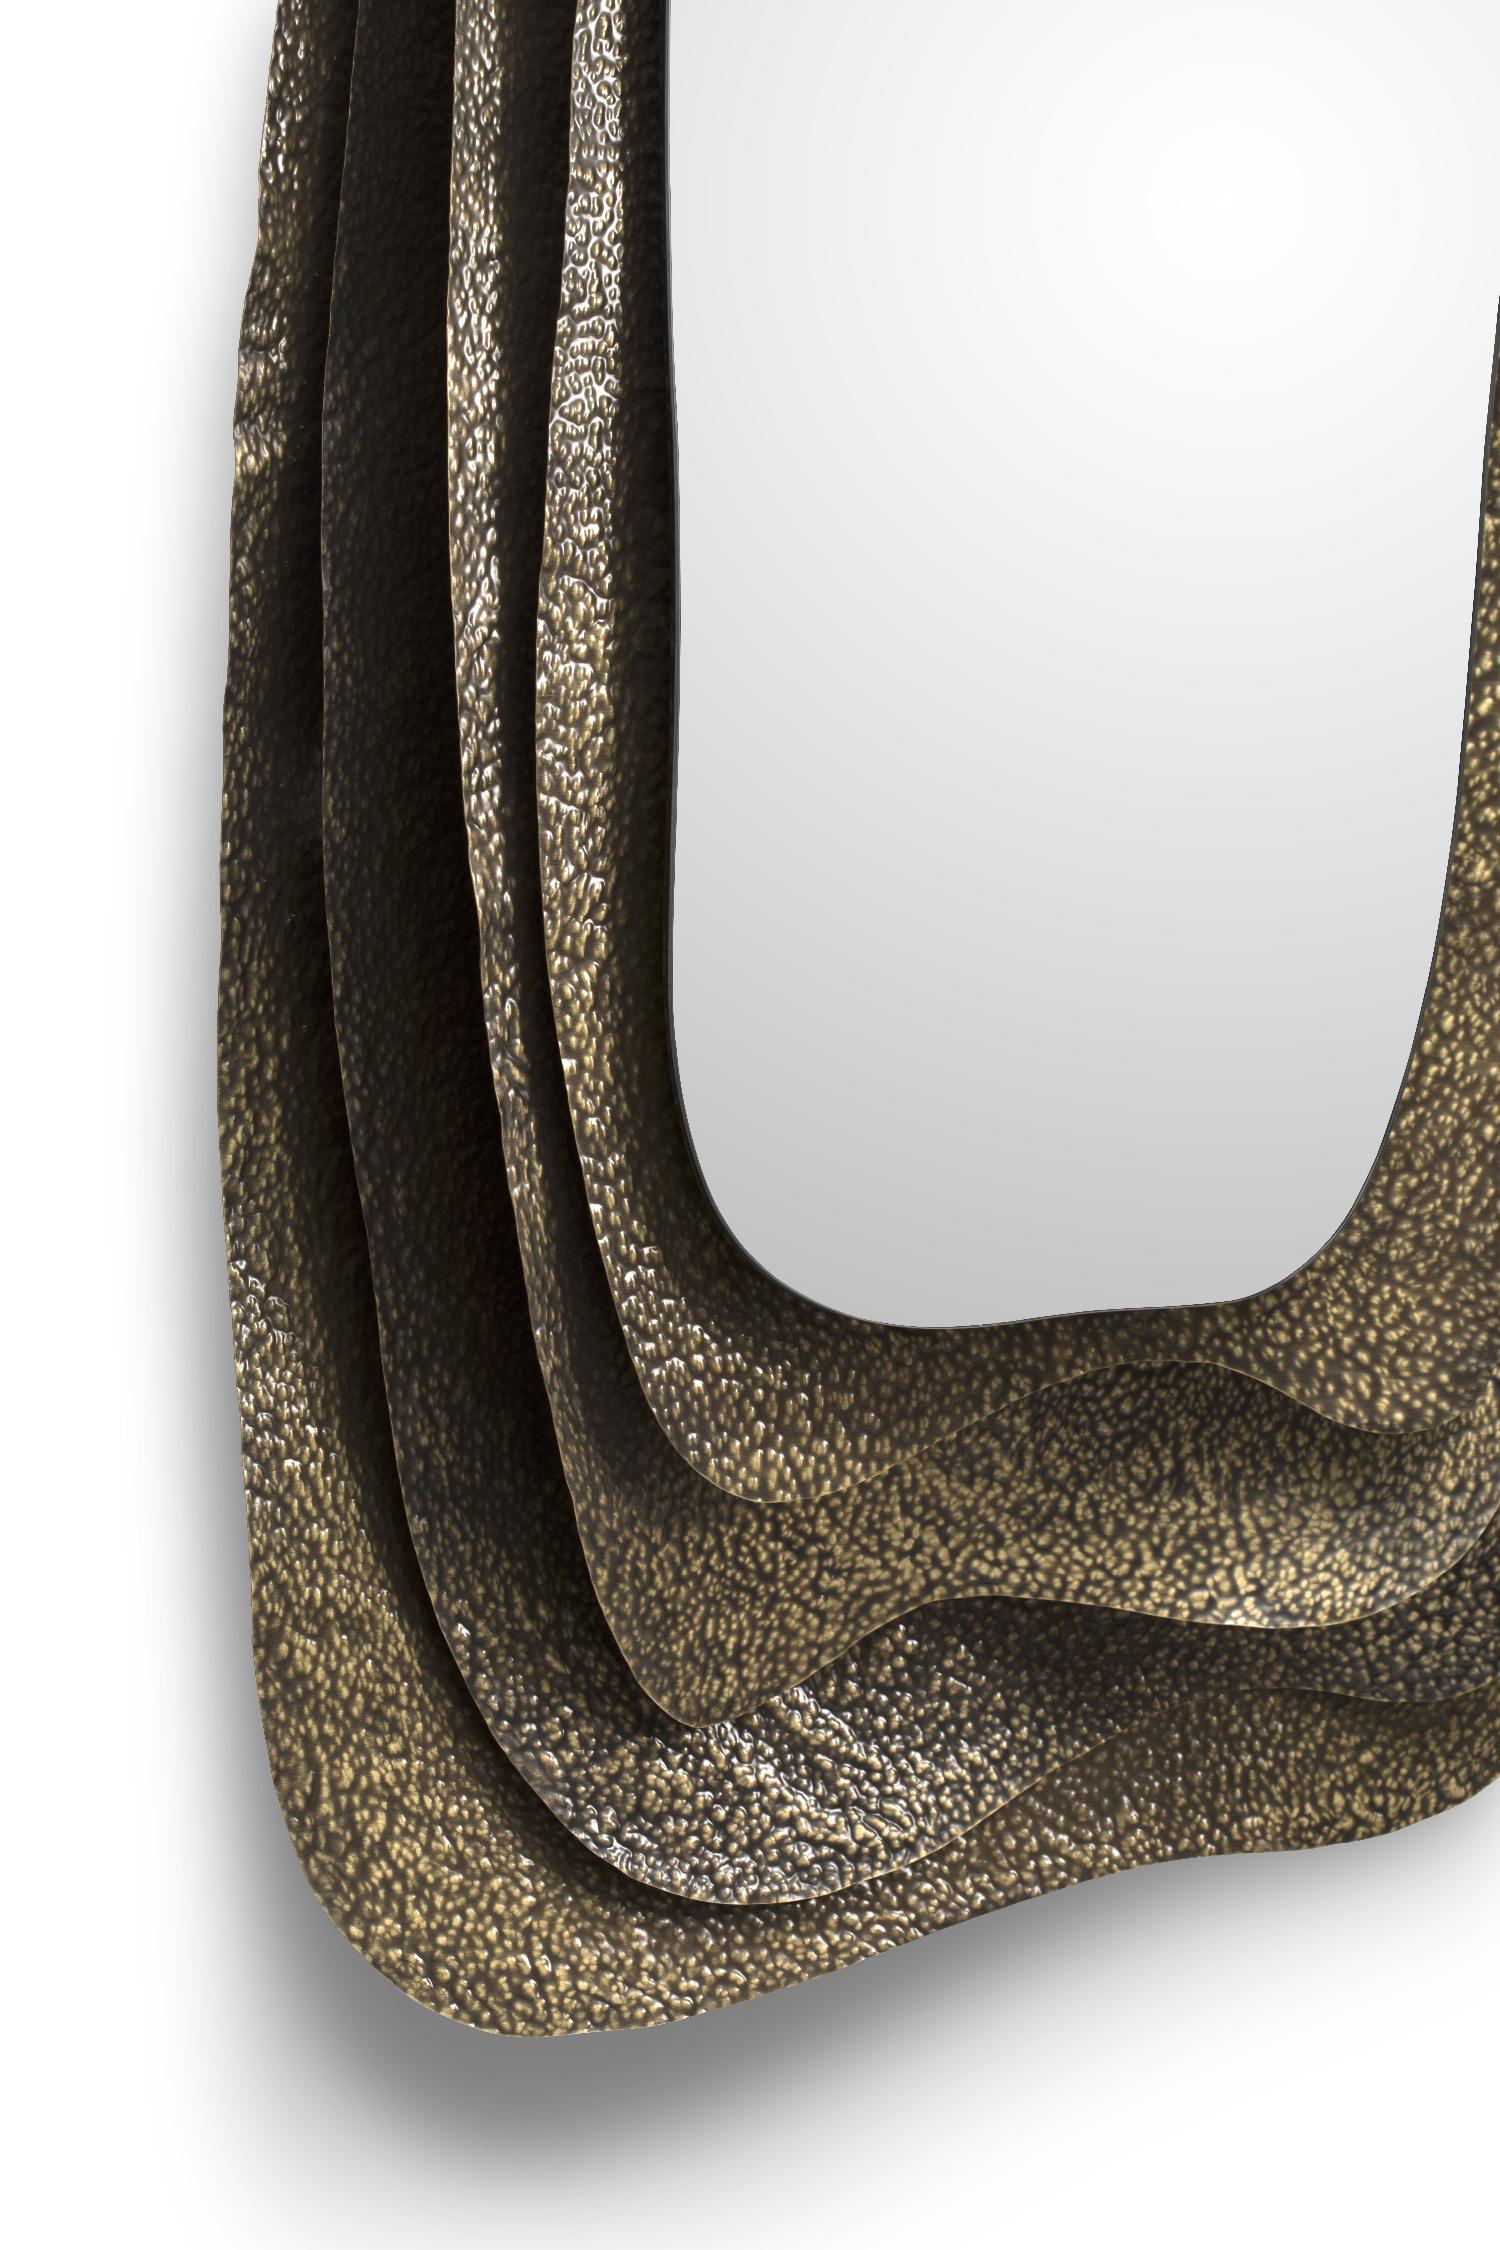 With origins in Japan, Kumi is an oyster with an undeniable beauty. Kumi mirror pays tribute to its allure through its glossy hammered aged brass. This decorative wall mirror is a treasure coveted by many.
Glossy hammered aged brass. Smoked Mirror.
